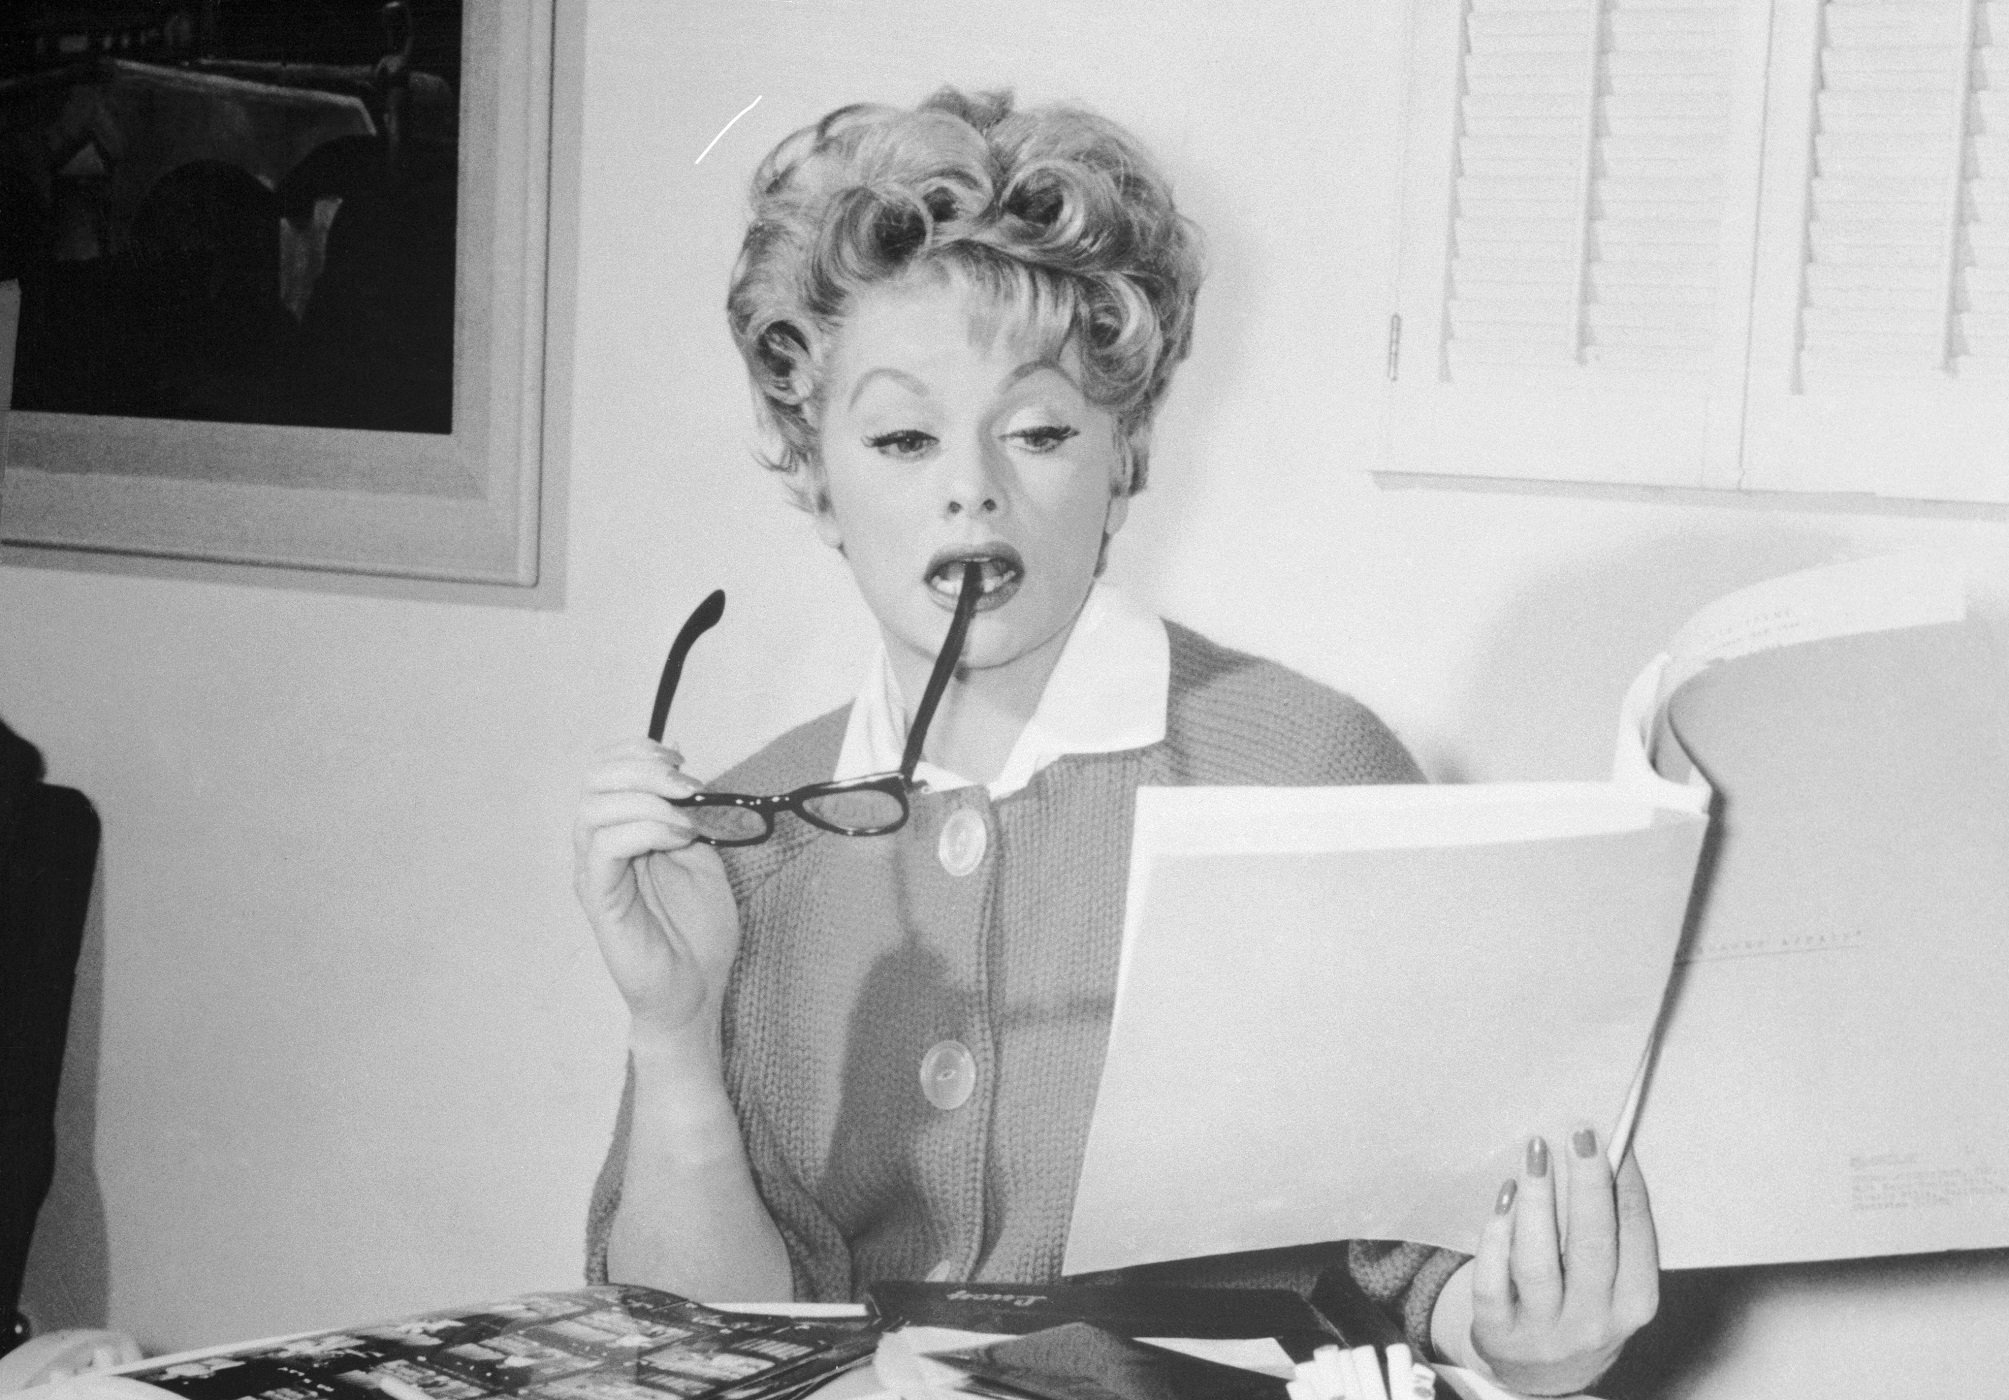 Lucille Ball reads scripts at her desk at Desilu Productions in 1967